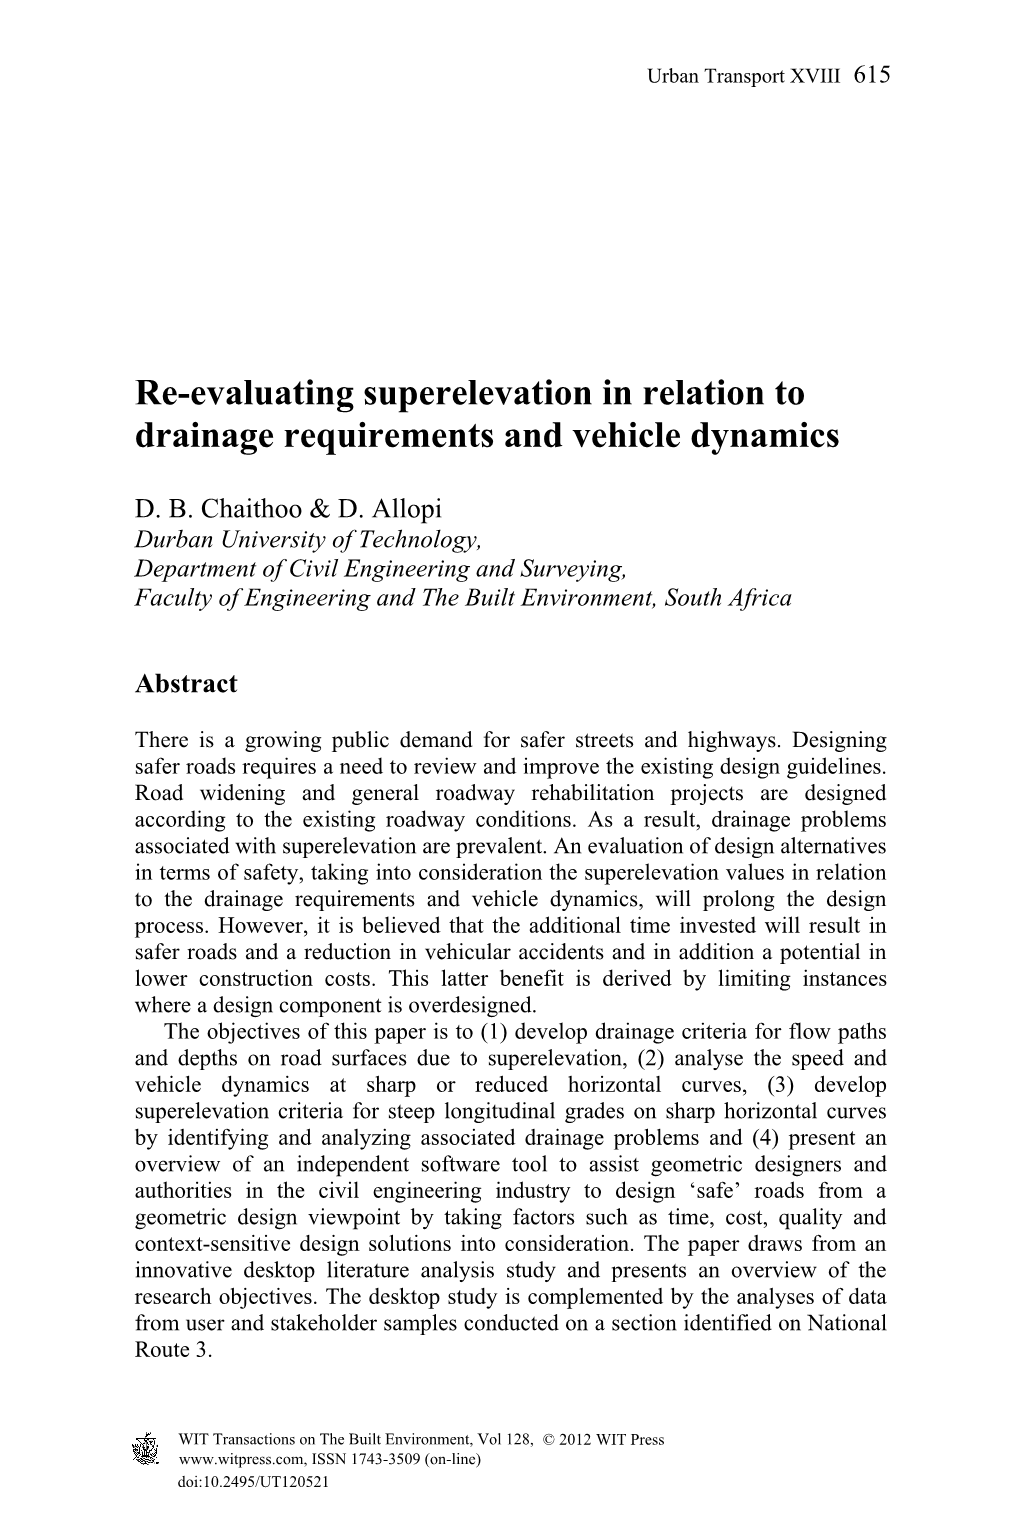 Re-Evaluating Superelevation in Relation to Drainage Requirements and Vehicle Dynamics